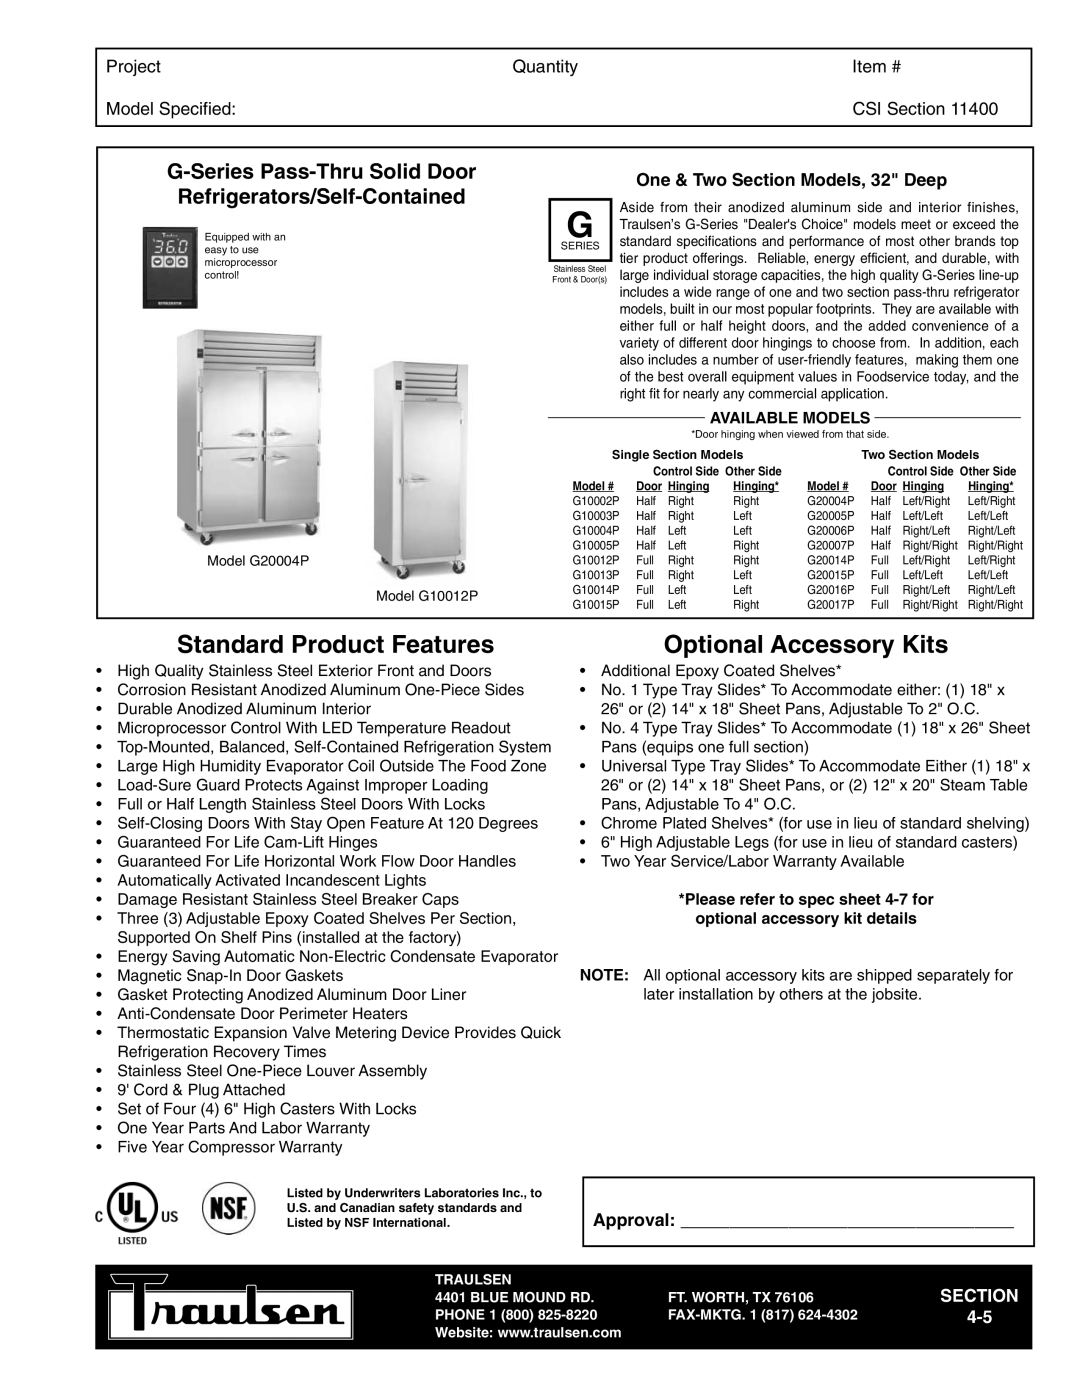 Traulsen G20015P warranty G-Series Pass-ThruSolid Door, Refrigerators/Self-Contained, Project, Quantity, Item #, Section 